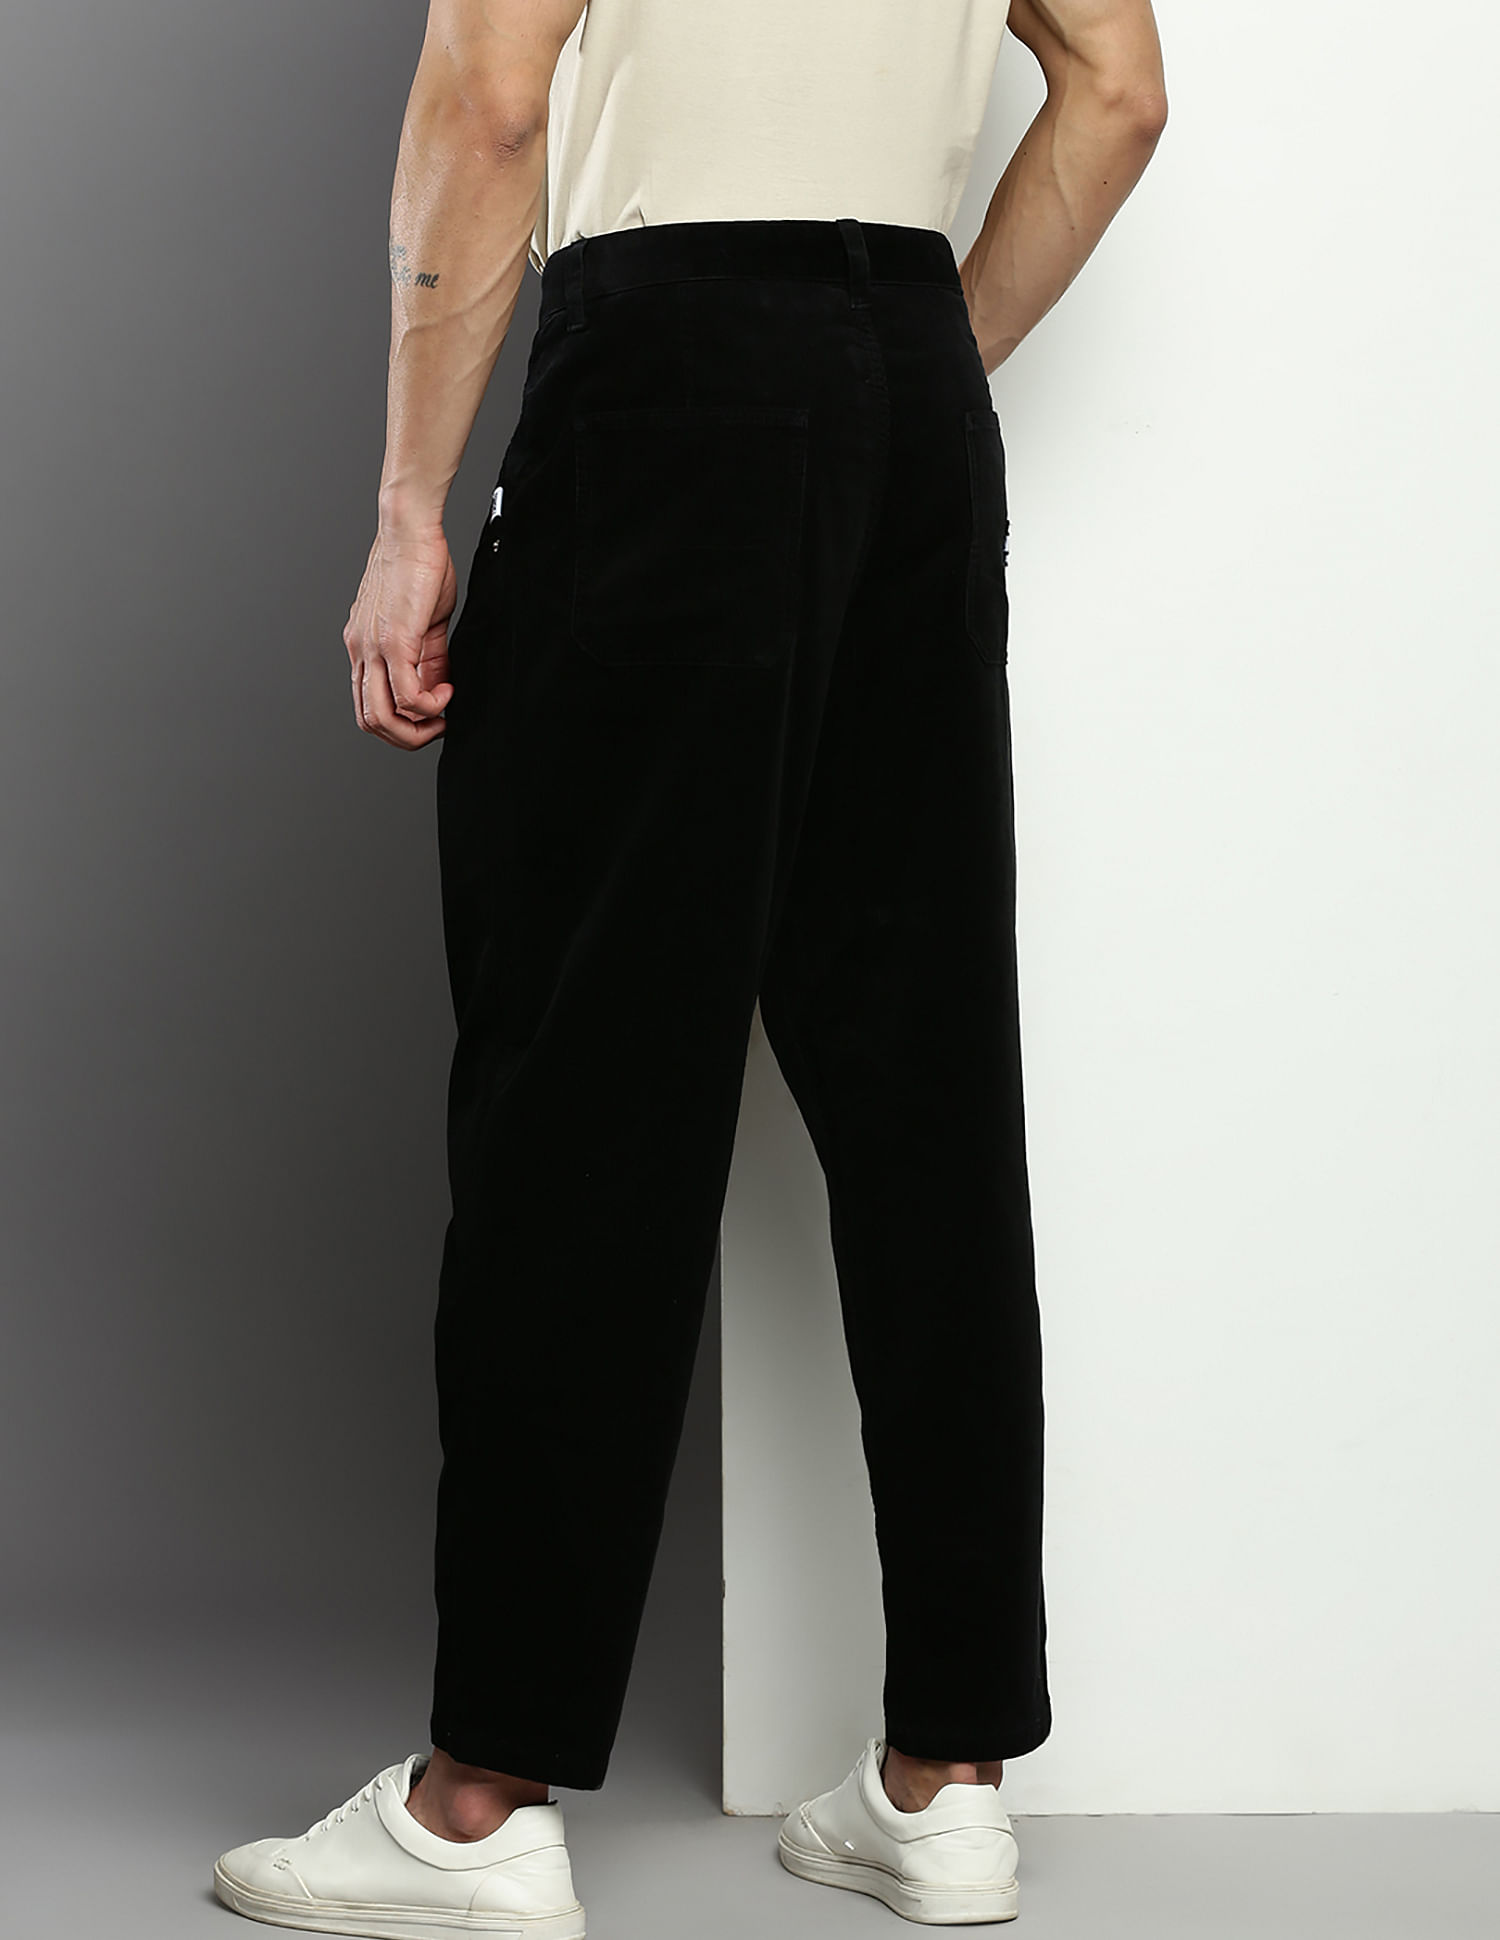 Topshop Stone Casual Corduroy Tapered Trousers  7 Fall Pants Trends More  Enticing Than Your Best Pair of Jeans  POPSUGAR Fashion Photo 34